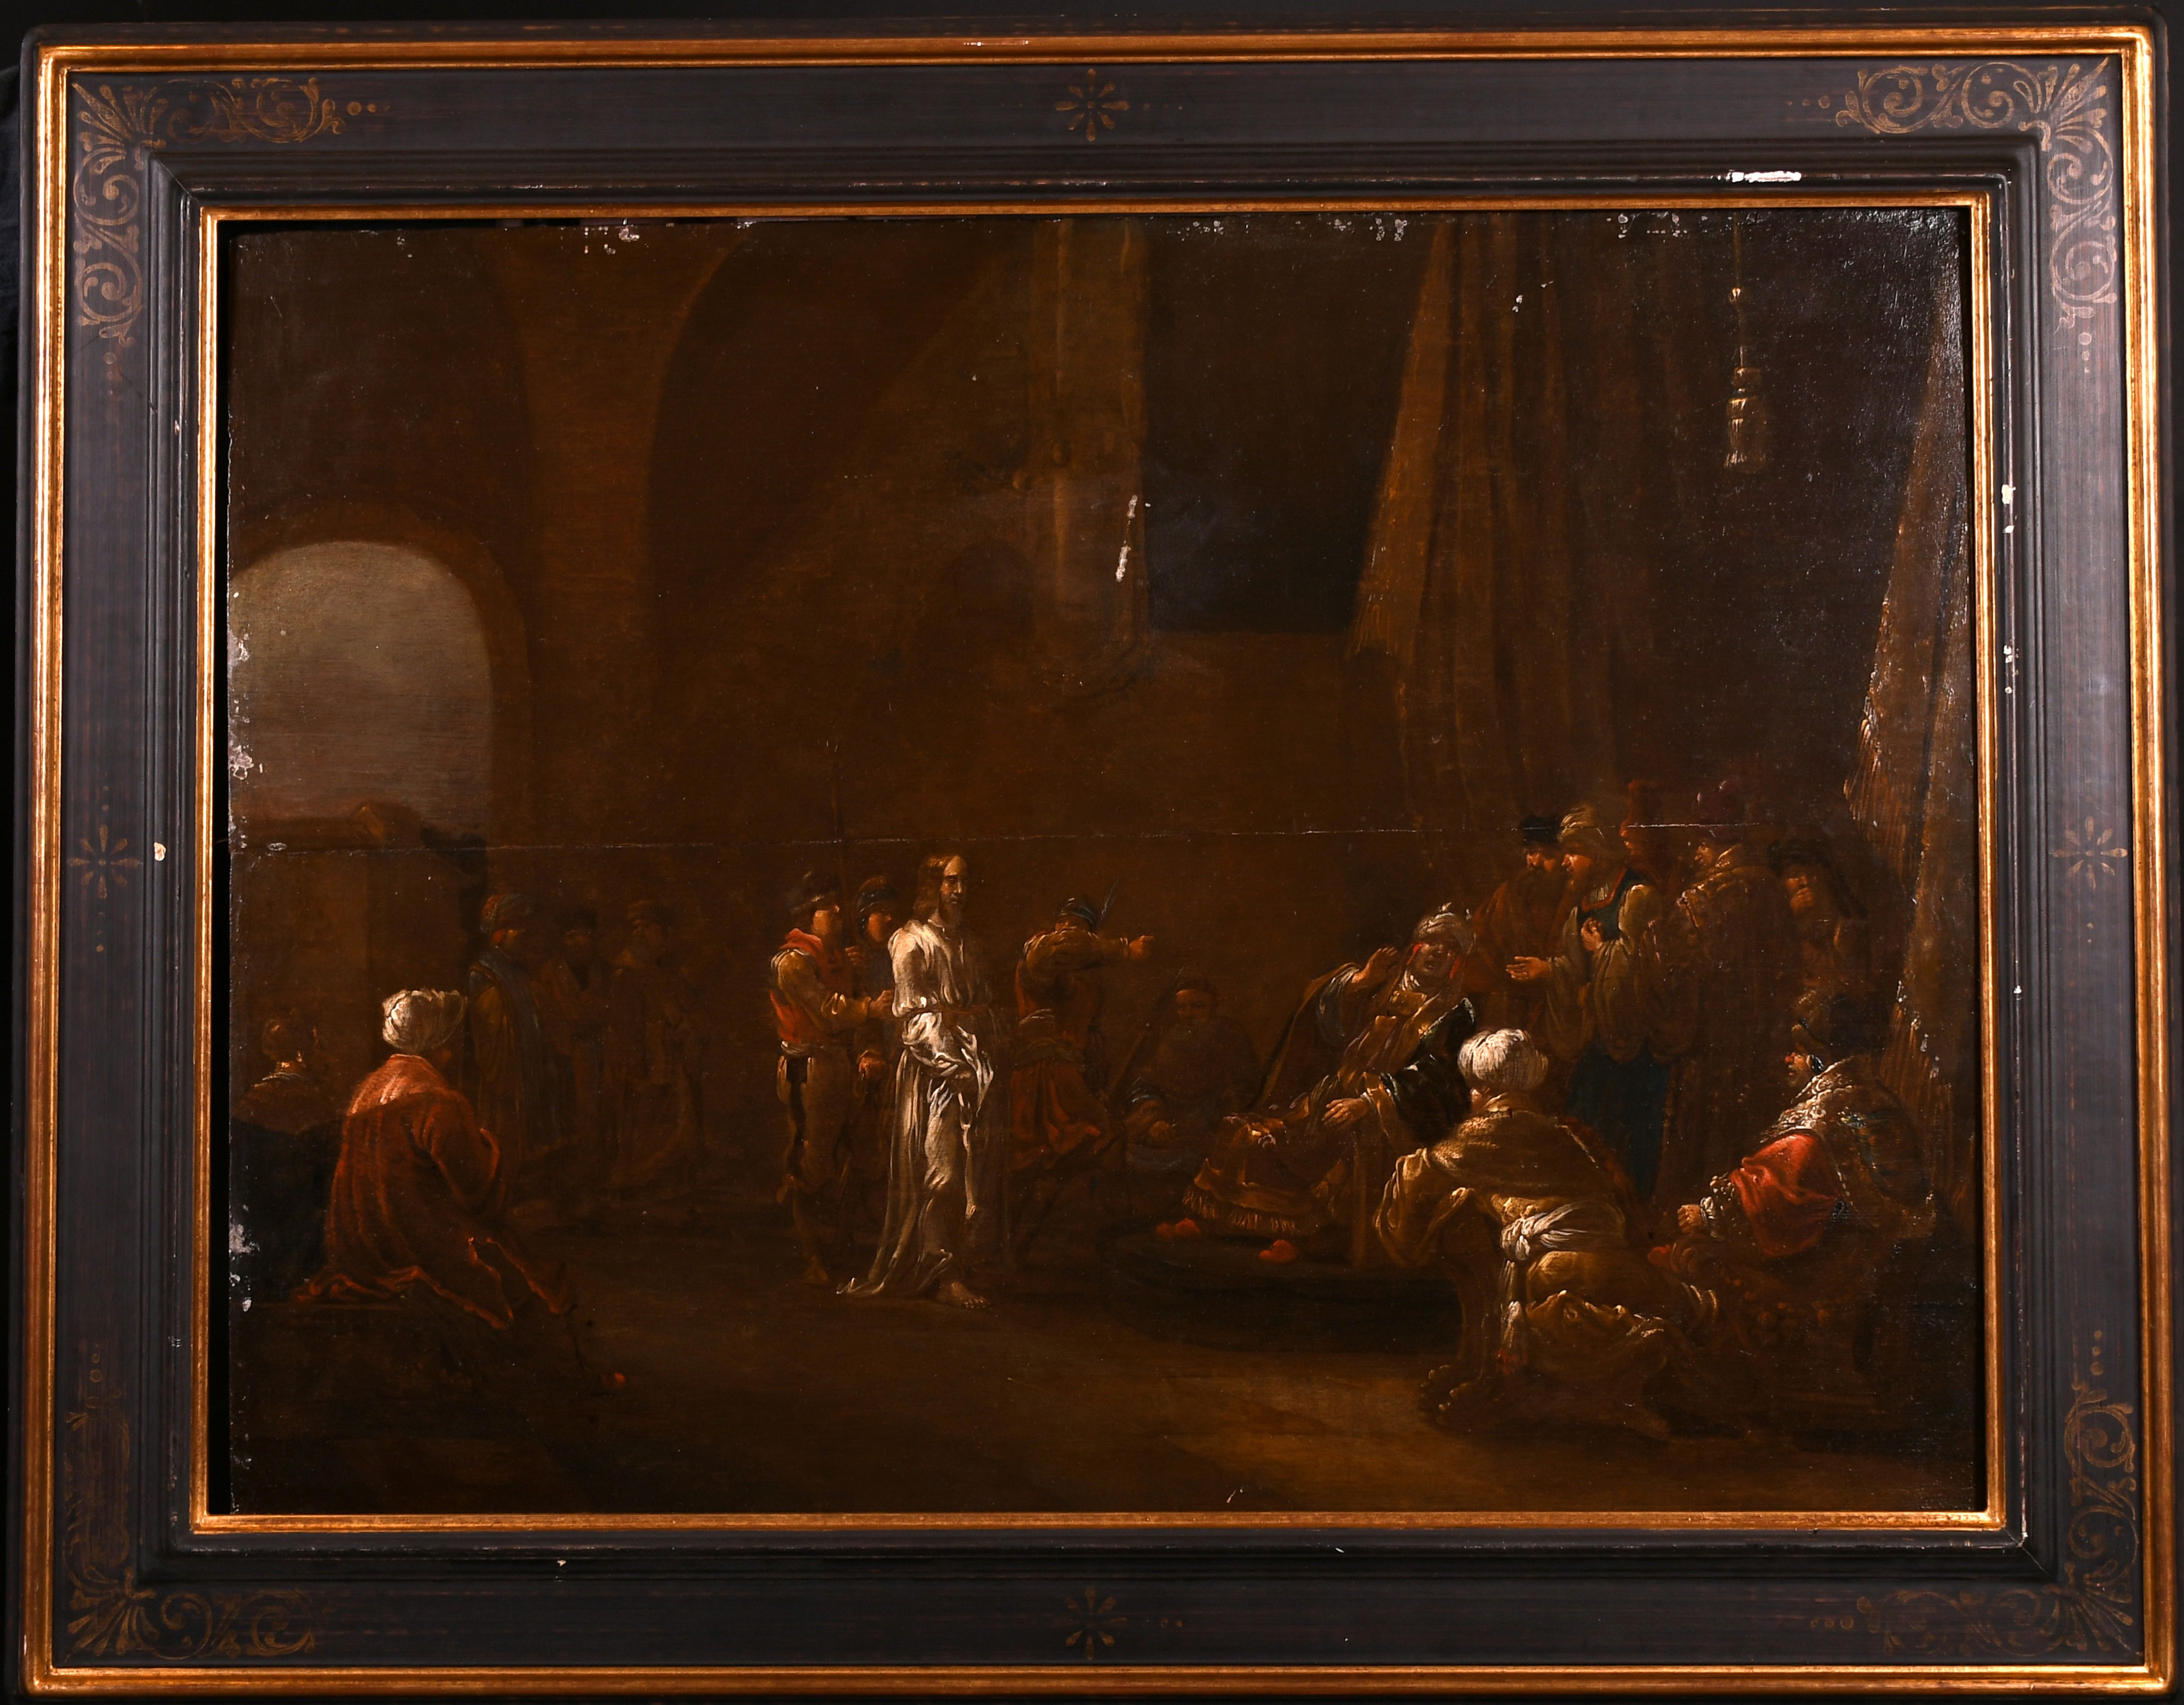 Late 17th Century Dutch School. ‘Christ before Caiaphas’, Oil on Panel, 19” x 25” (48.2 x 63.5cm) - Image 2 of 3